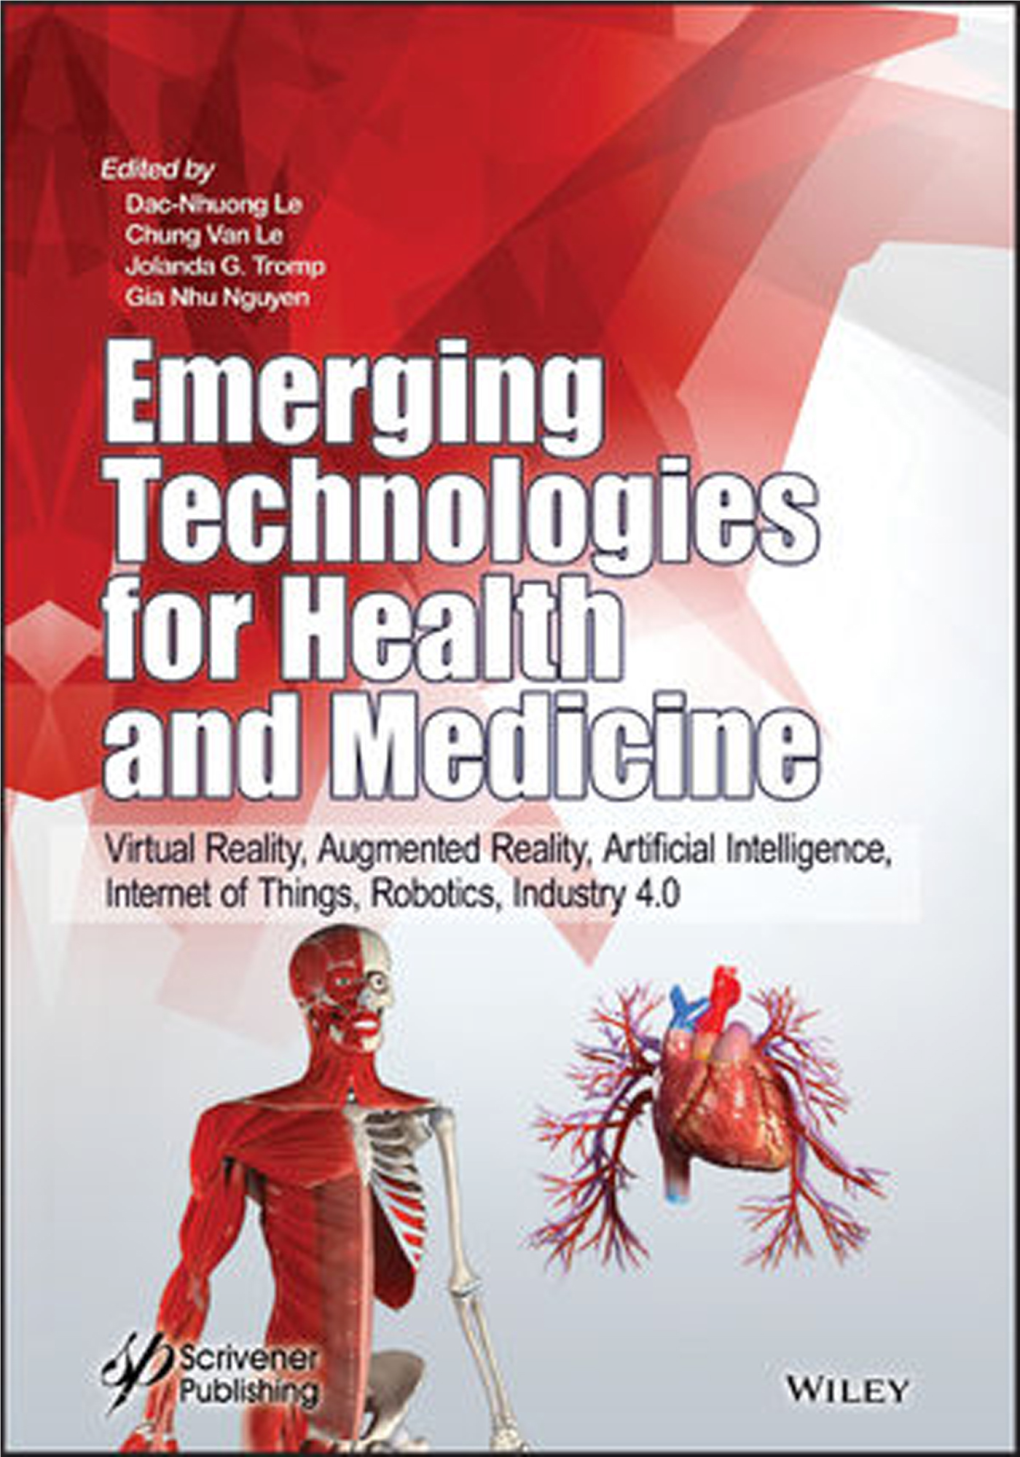 Emerging Technologies for Health and Medicine Scrivener Publishing 100 Cummings Center, Suite 541J Beverly, MA 01915-6106